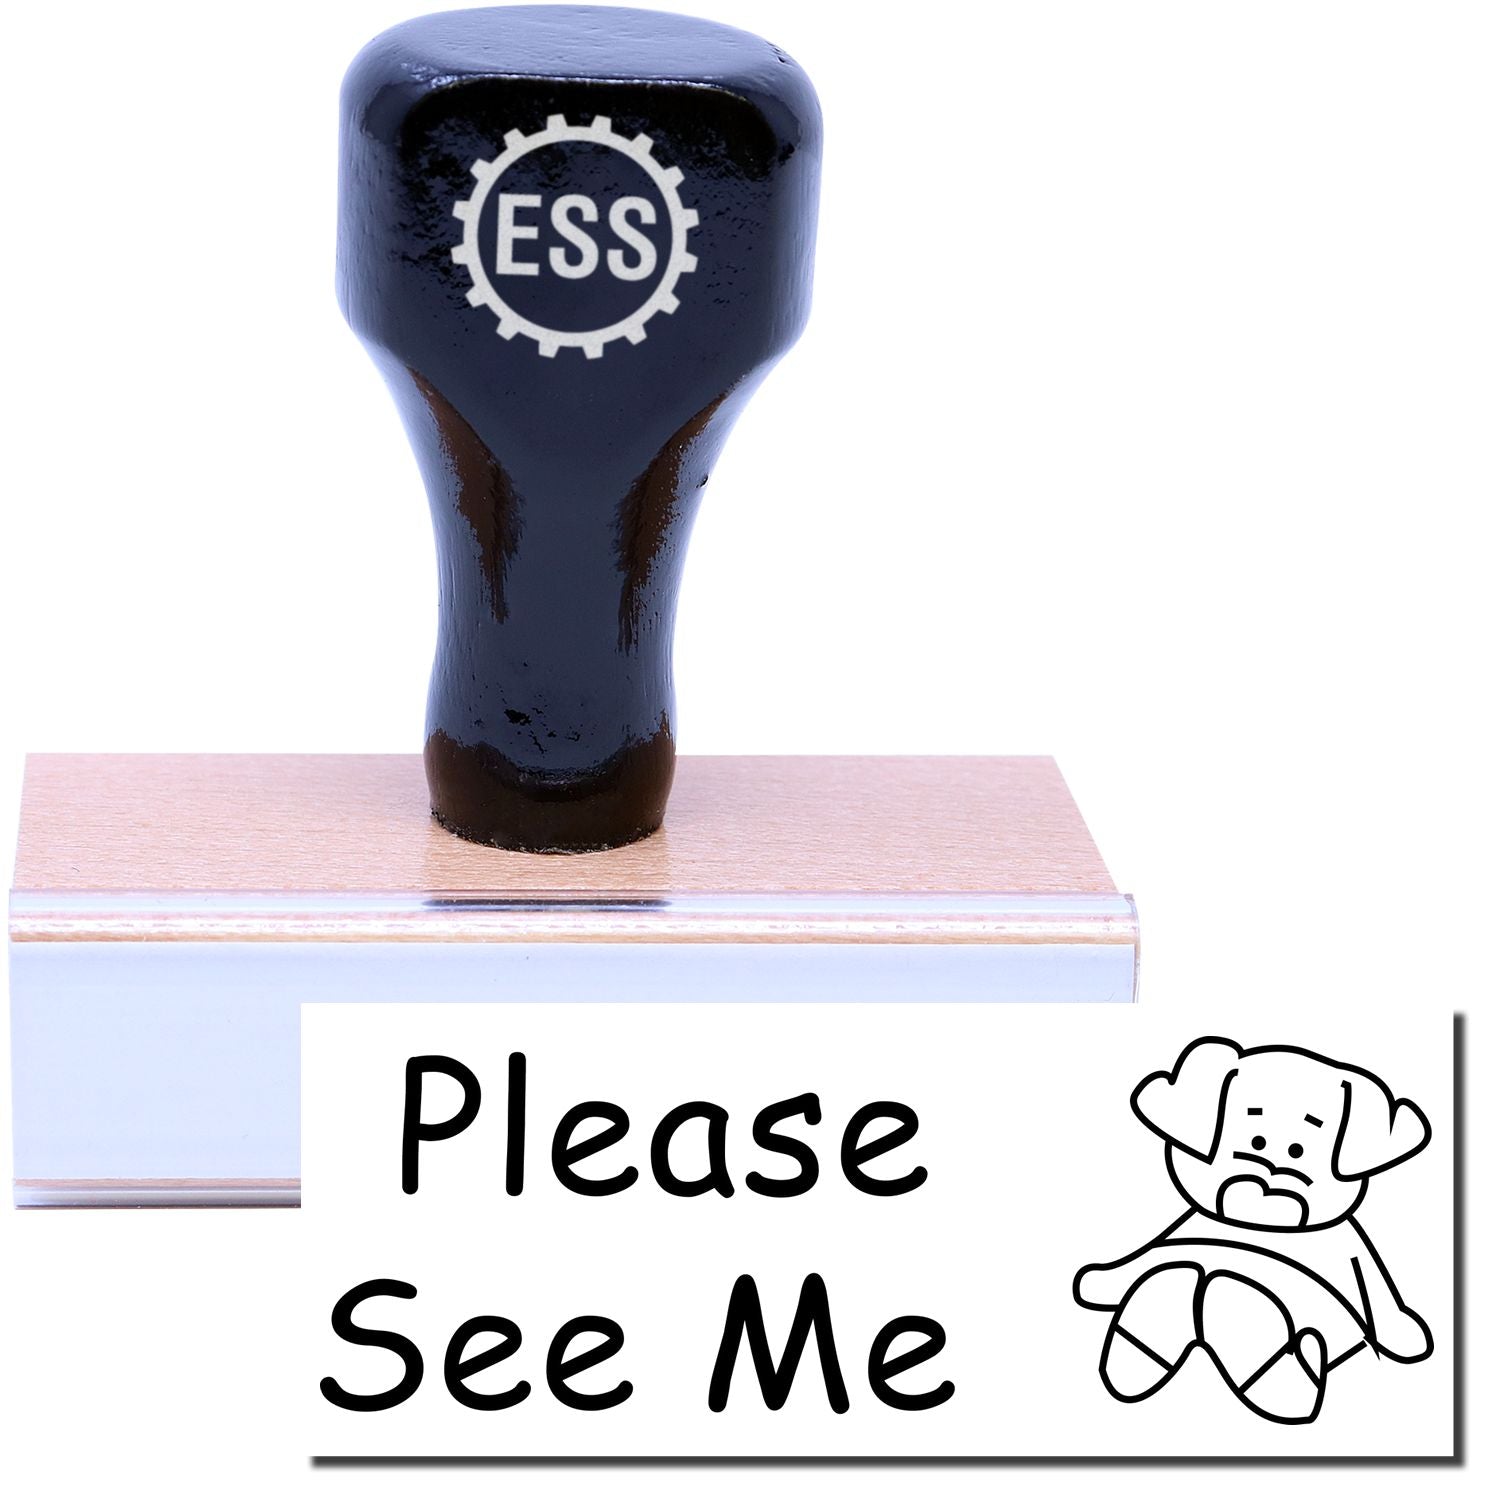 A stock office rubber stamp with a stamped image showing how the text "Please See Me" in a large font with a small image of a dog on the side is displayed after stamping.